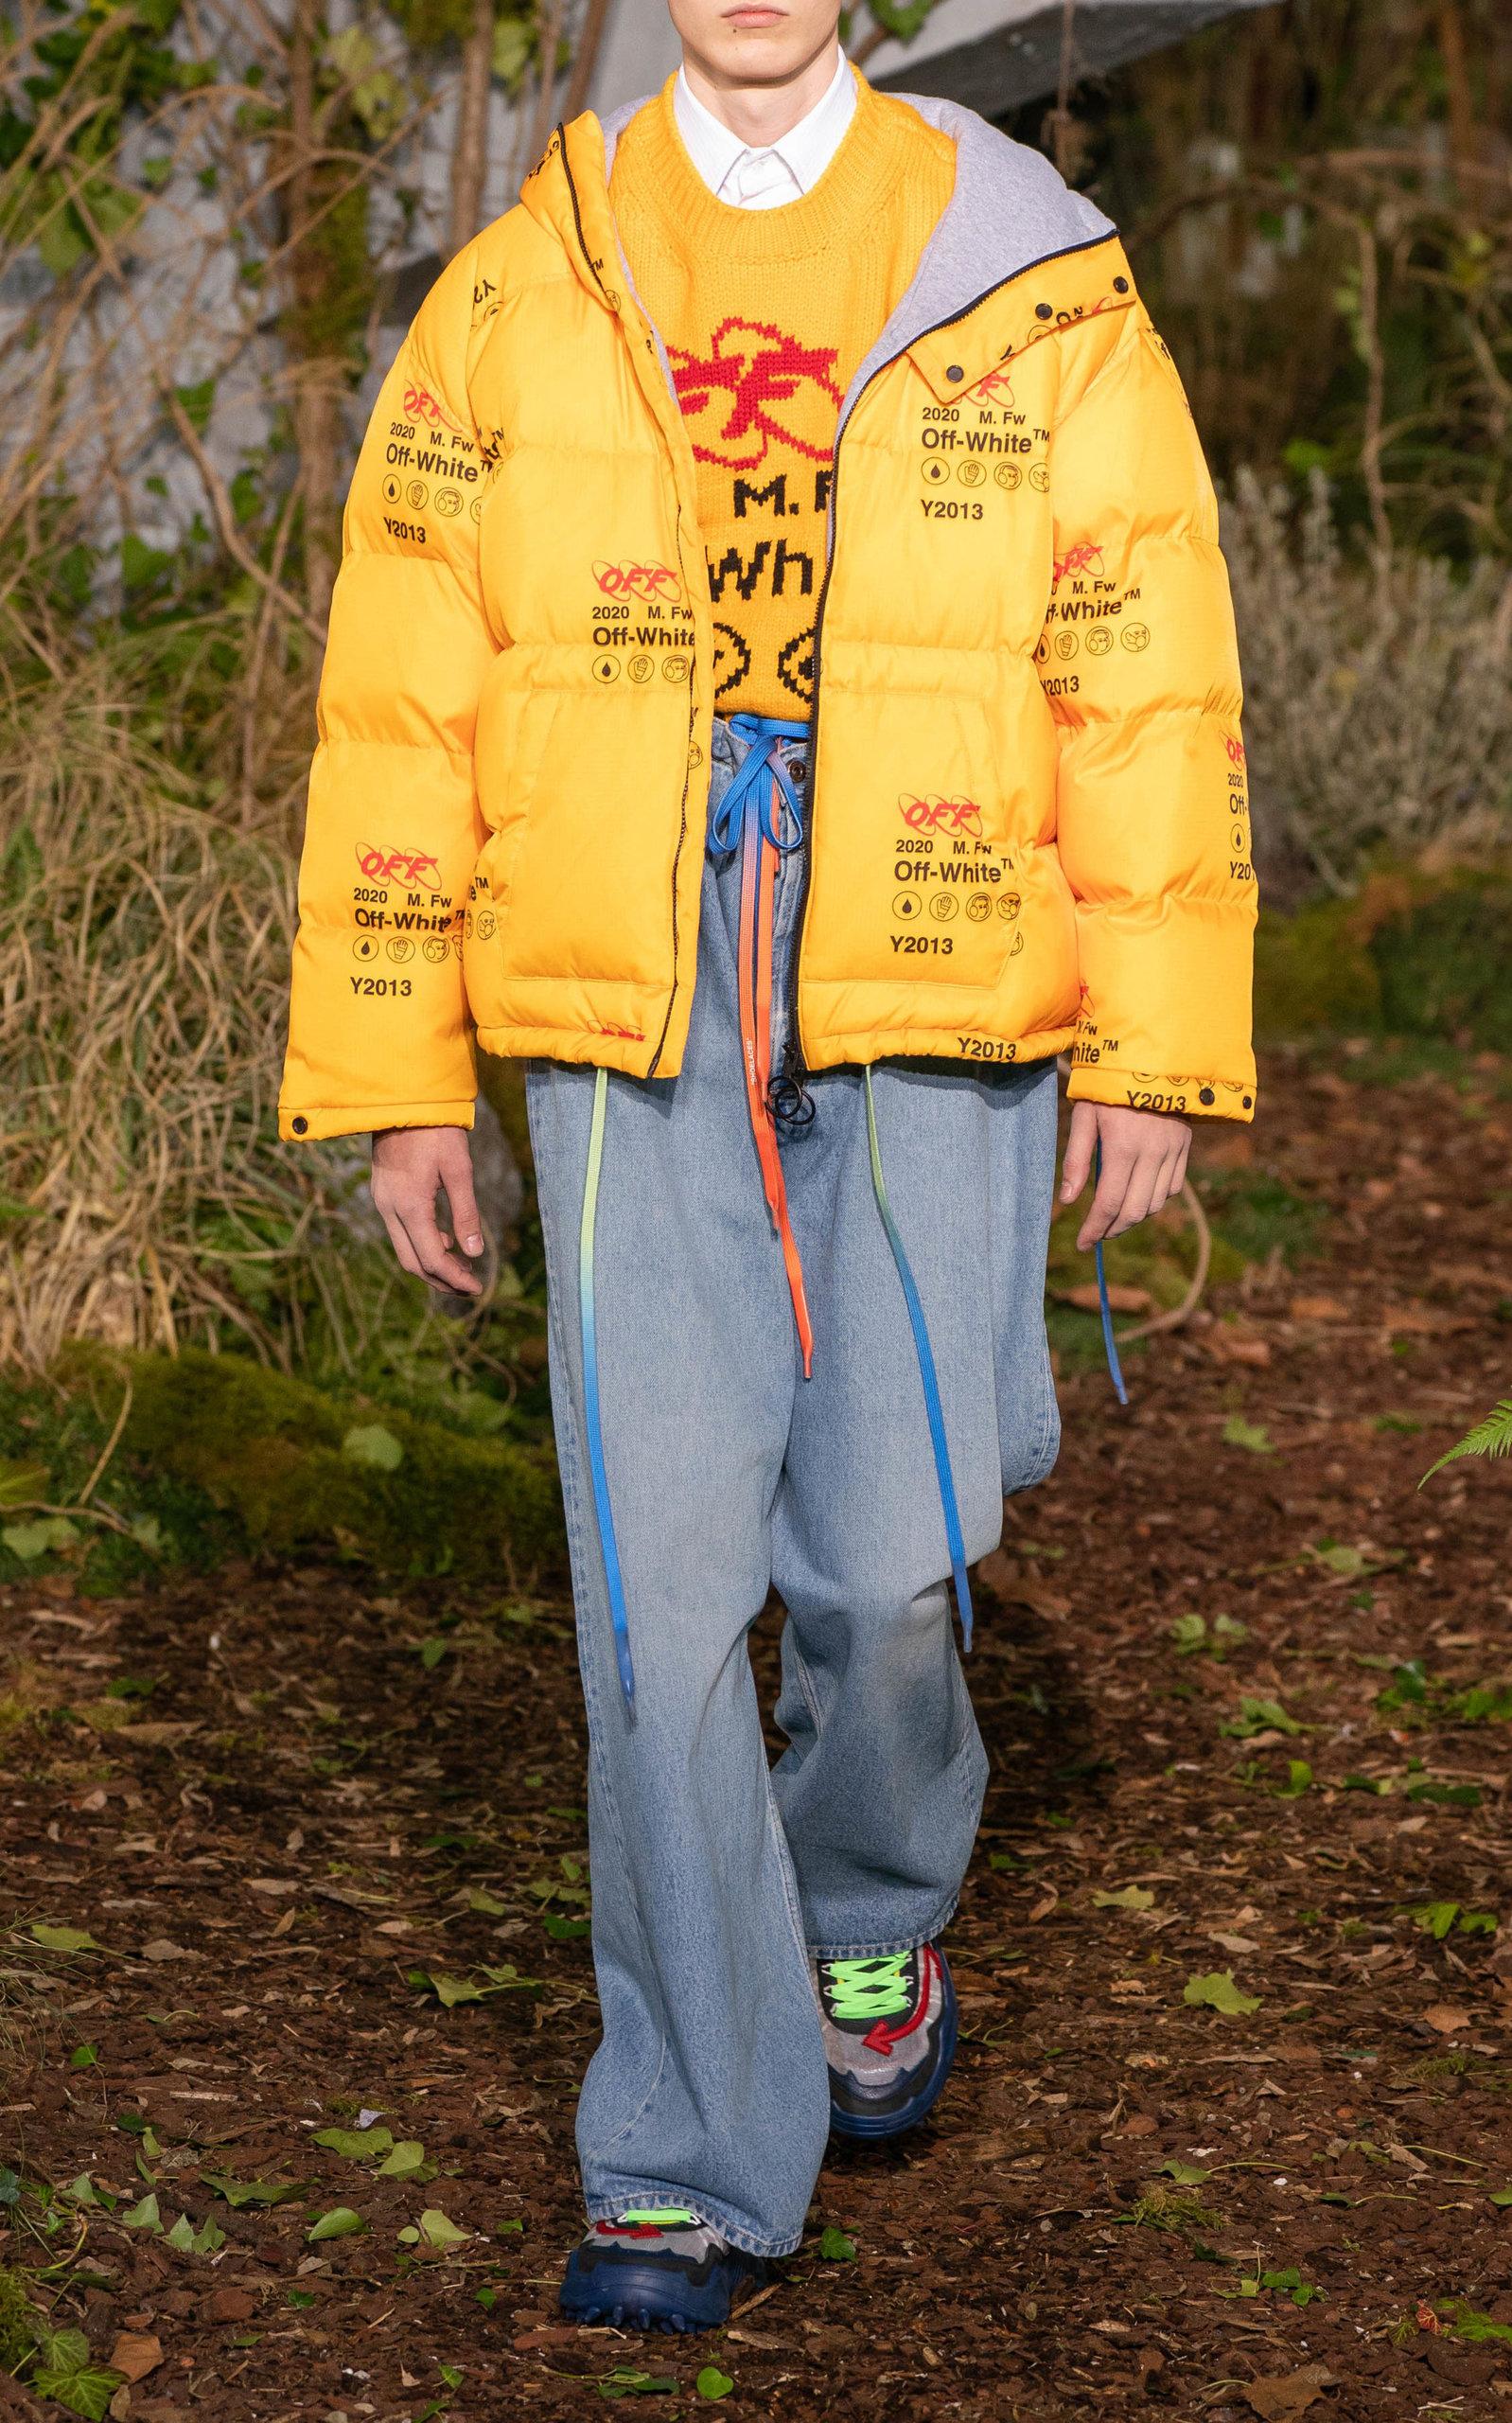 Off-White c/o Virgil Abloh Industrial Logo Puffer Jacket in Yellow